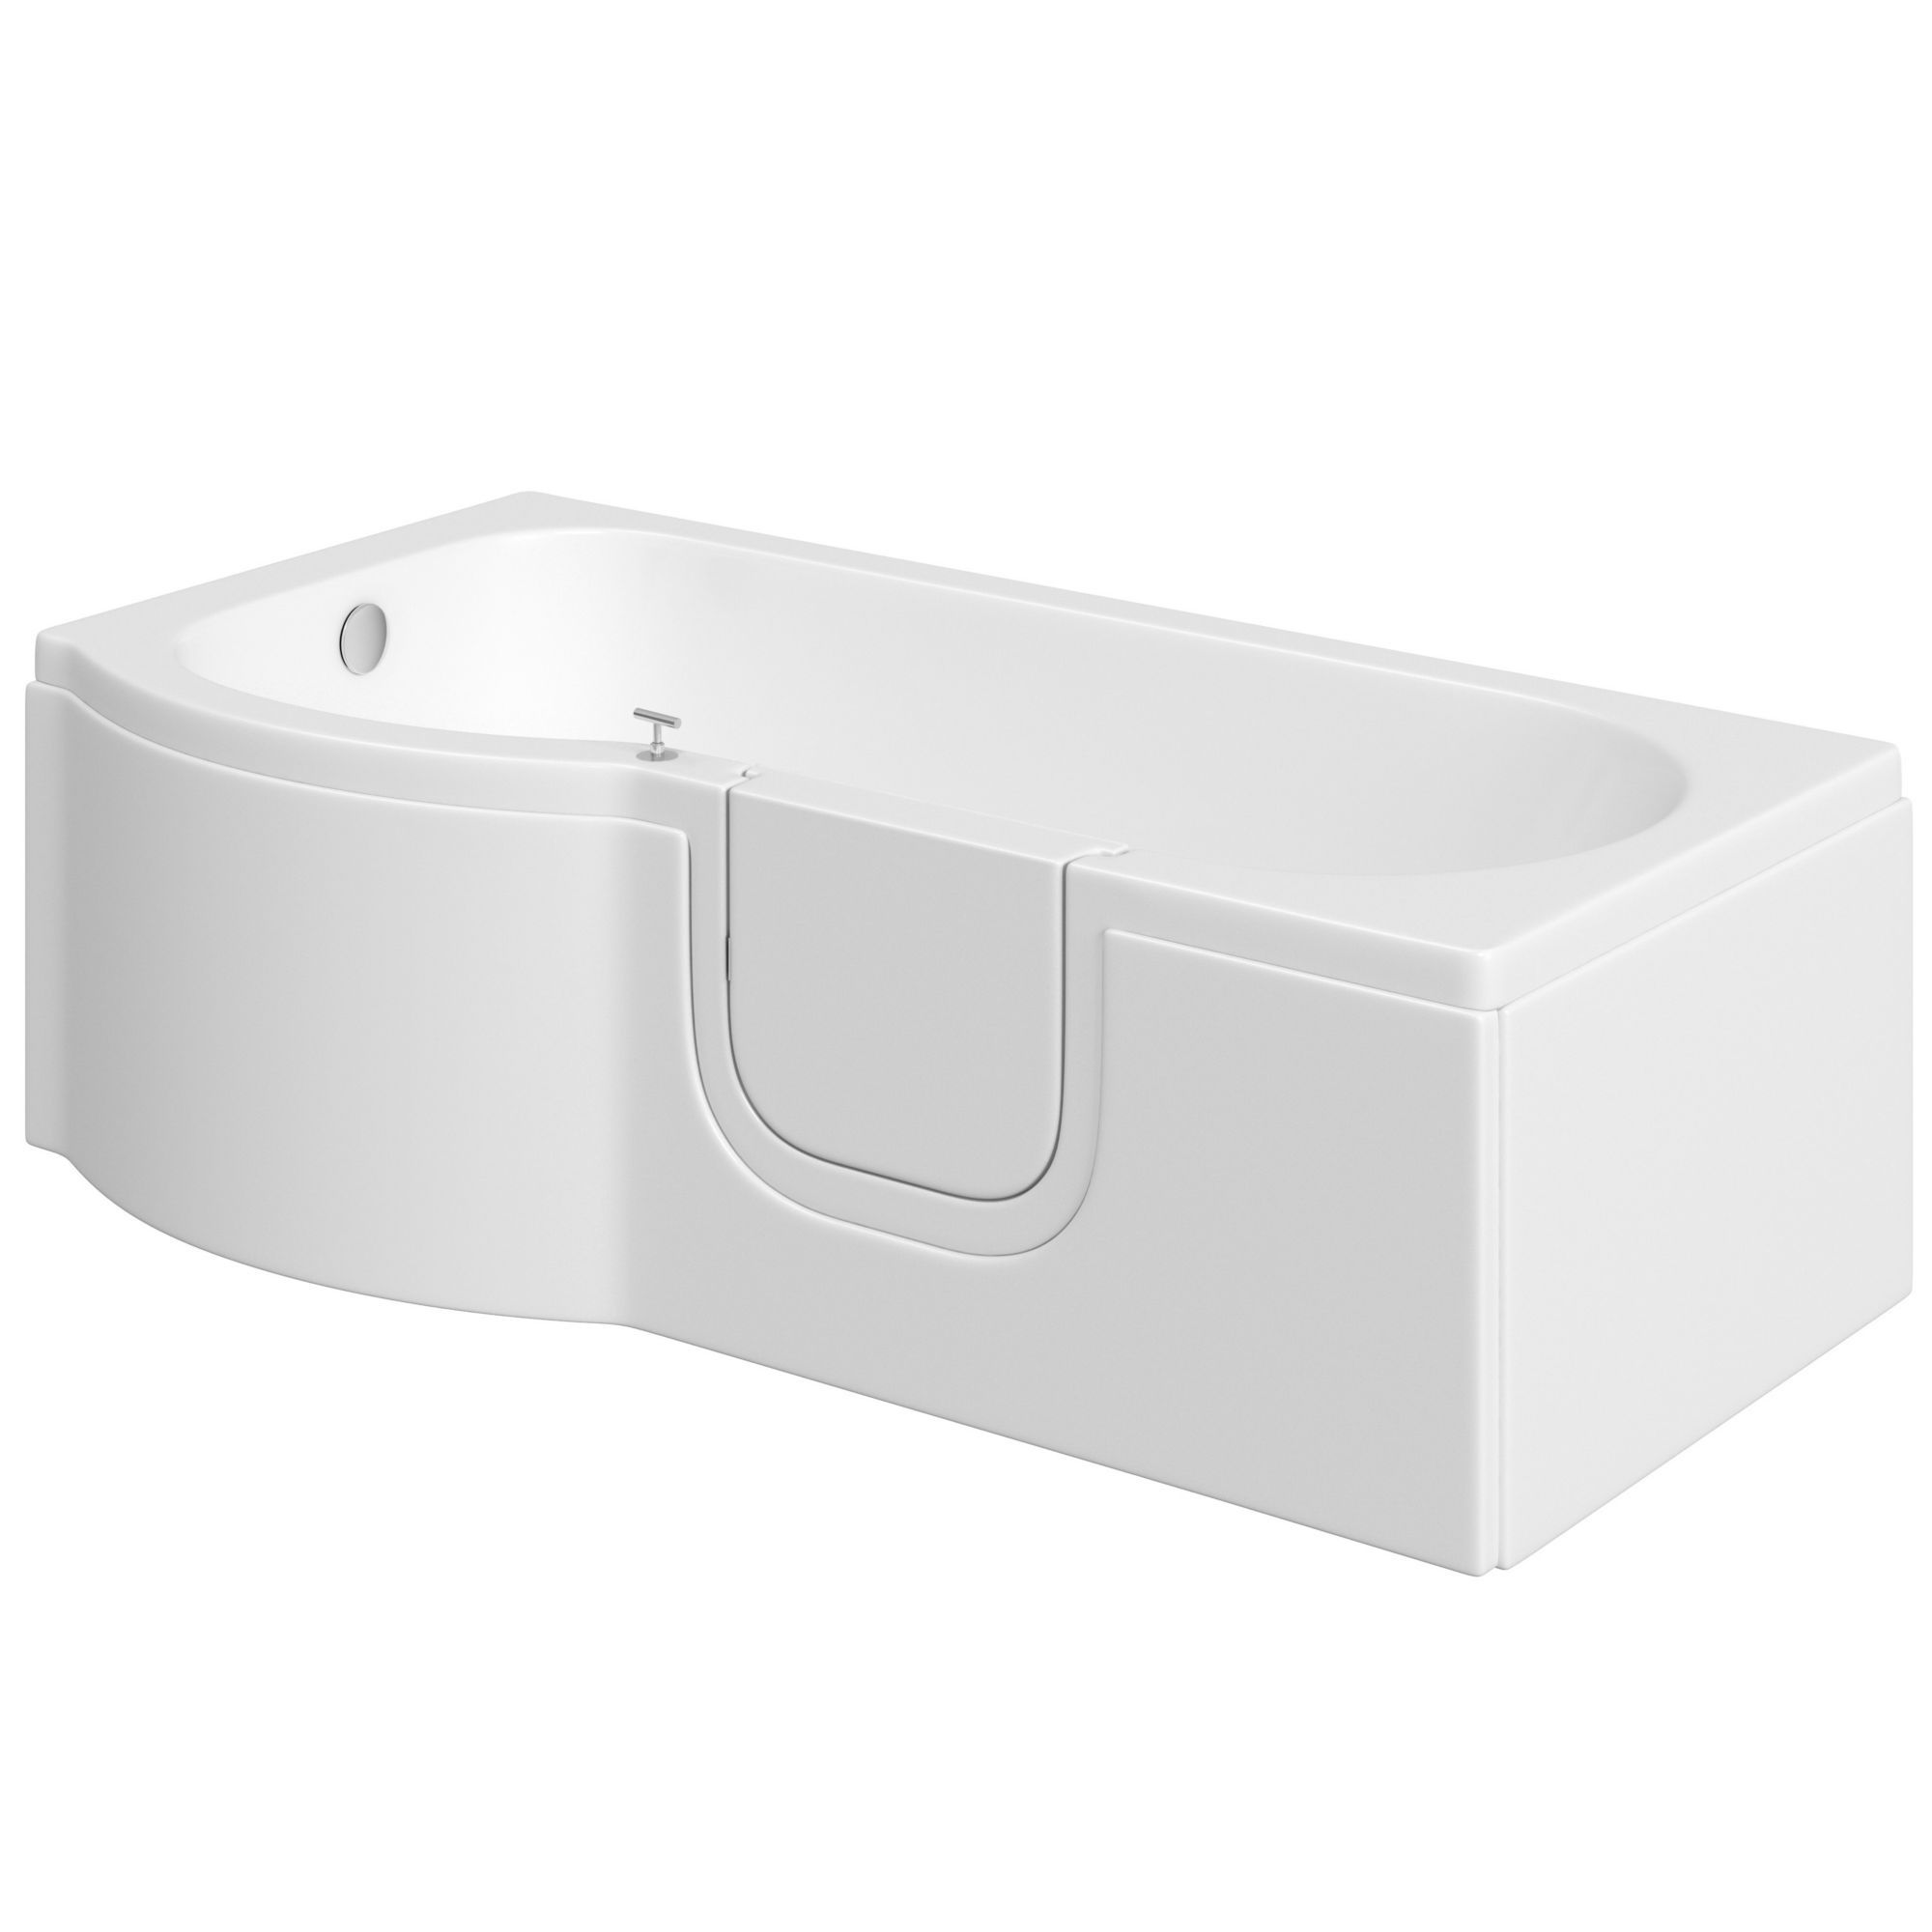 Cooke & Lewis White Easy-access Acrylic P-shaped Right-handed Shower Bath (L)1675mm (W)850mm